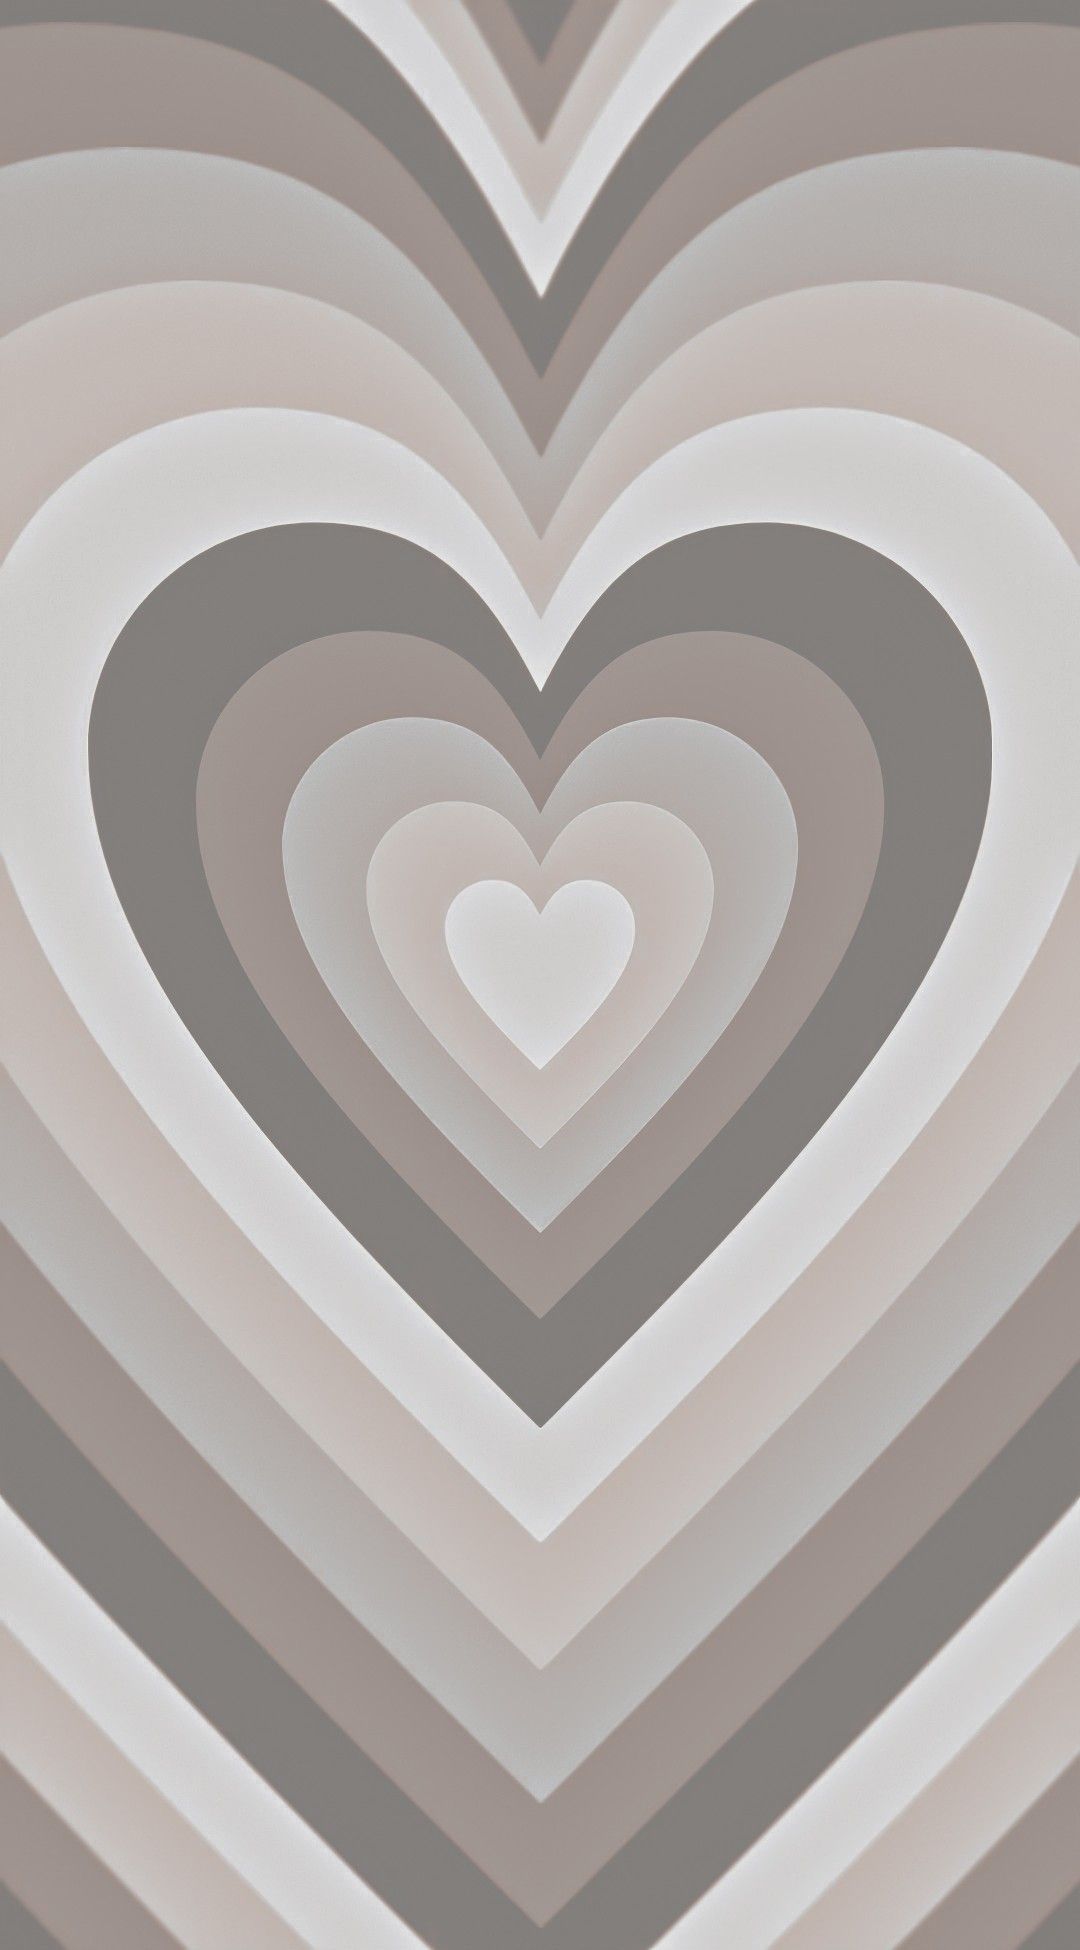 A heart wallpaper for your phone! - Heart